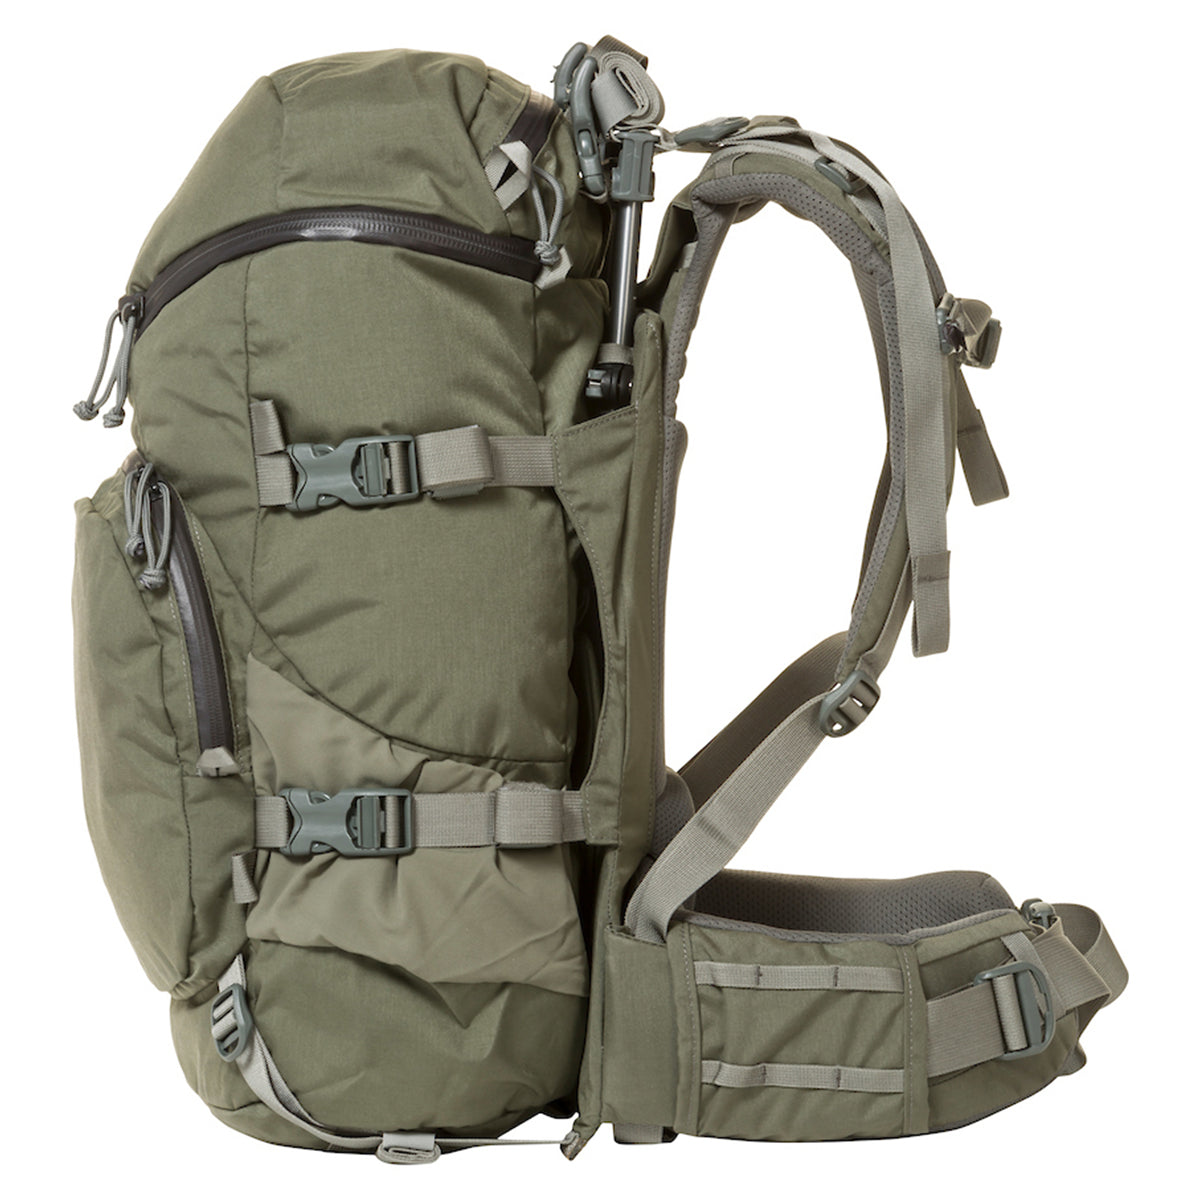 Mystery Ranch Pop Up 28 Backpack in Mystery Ranch Pop Up 28 Backpack (2020) by Mystery Ranch | Gear - goHUNT Shop by GOHUNT | Mystery Ranch - GOHUNT Shop